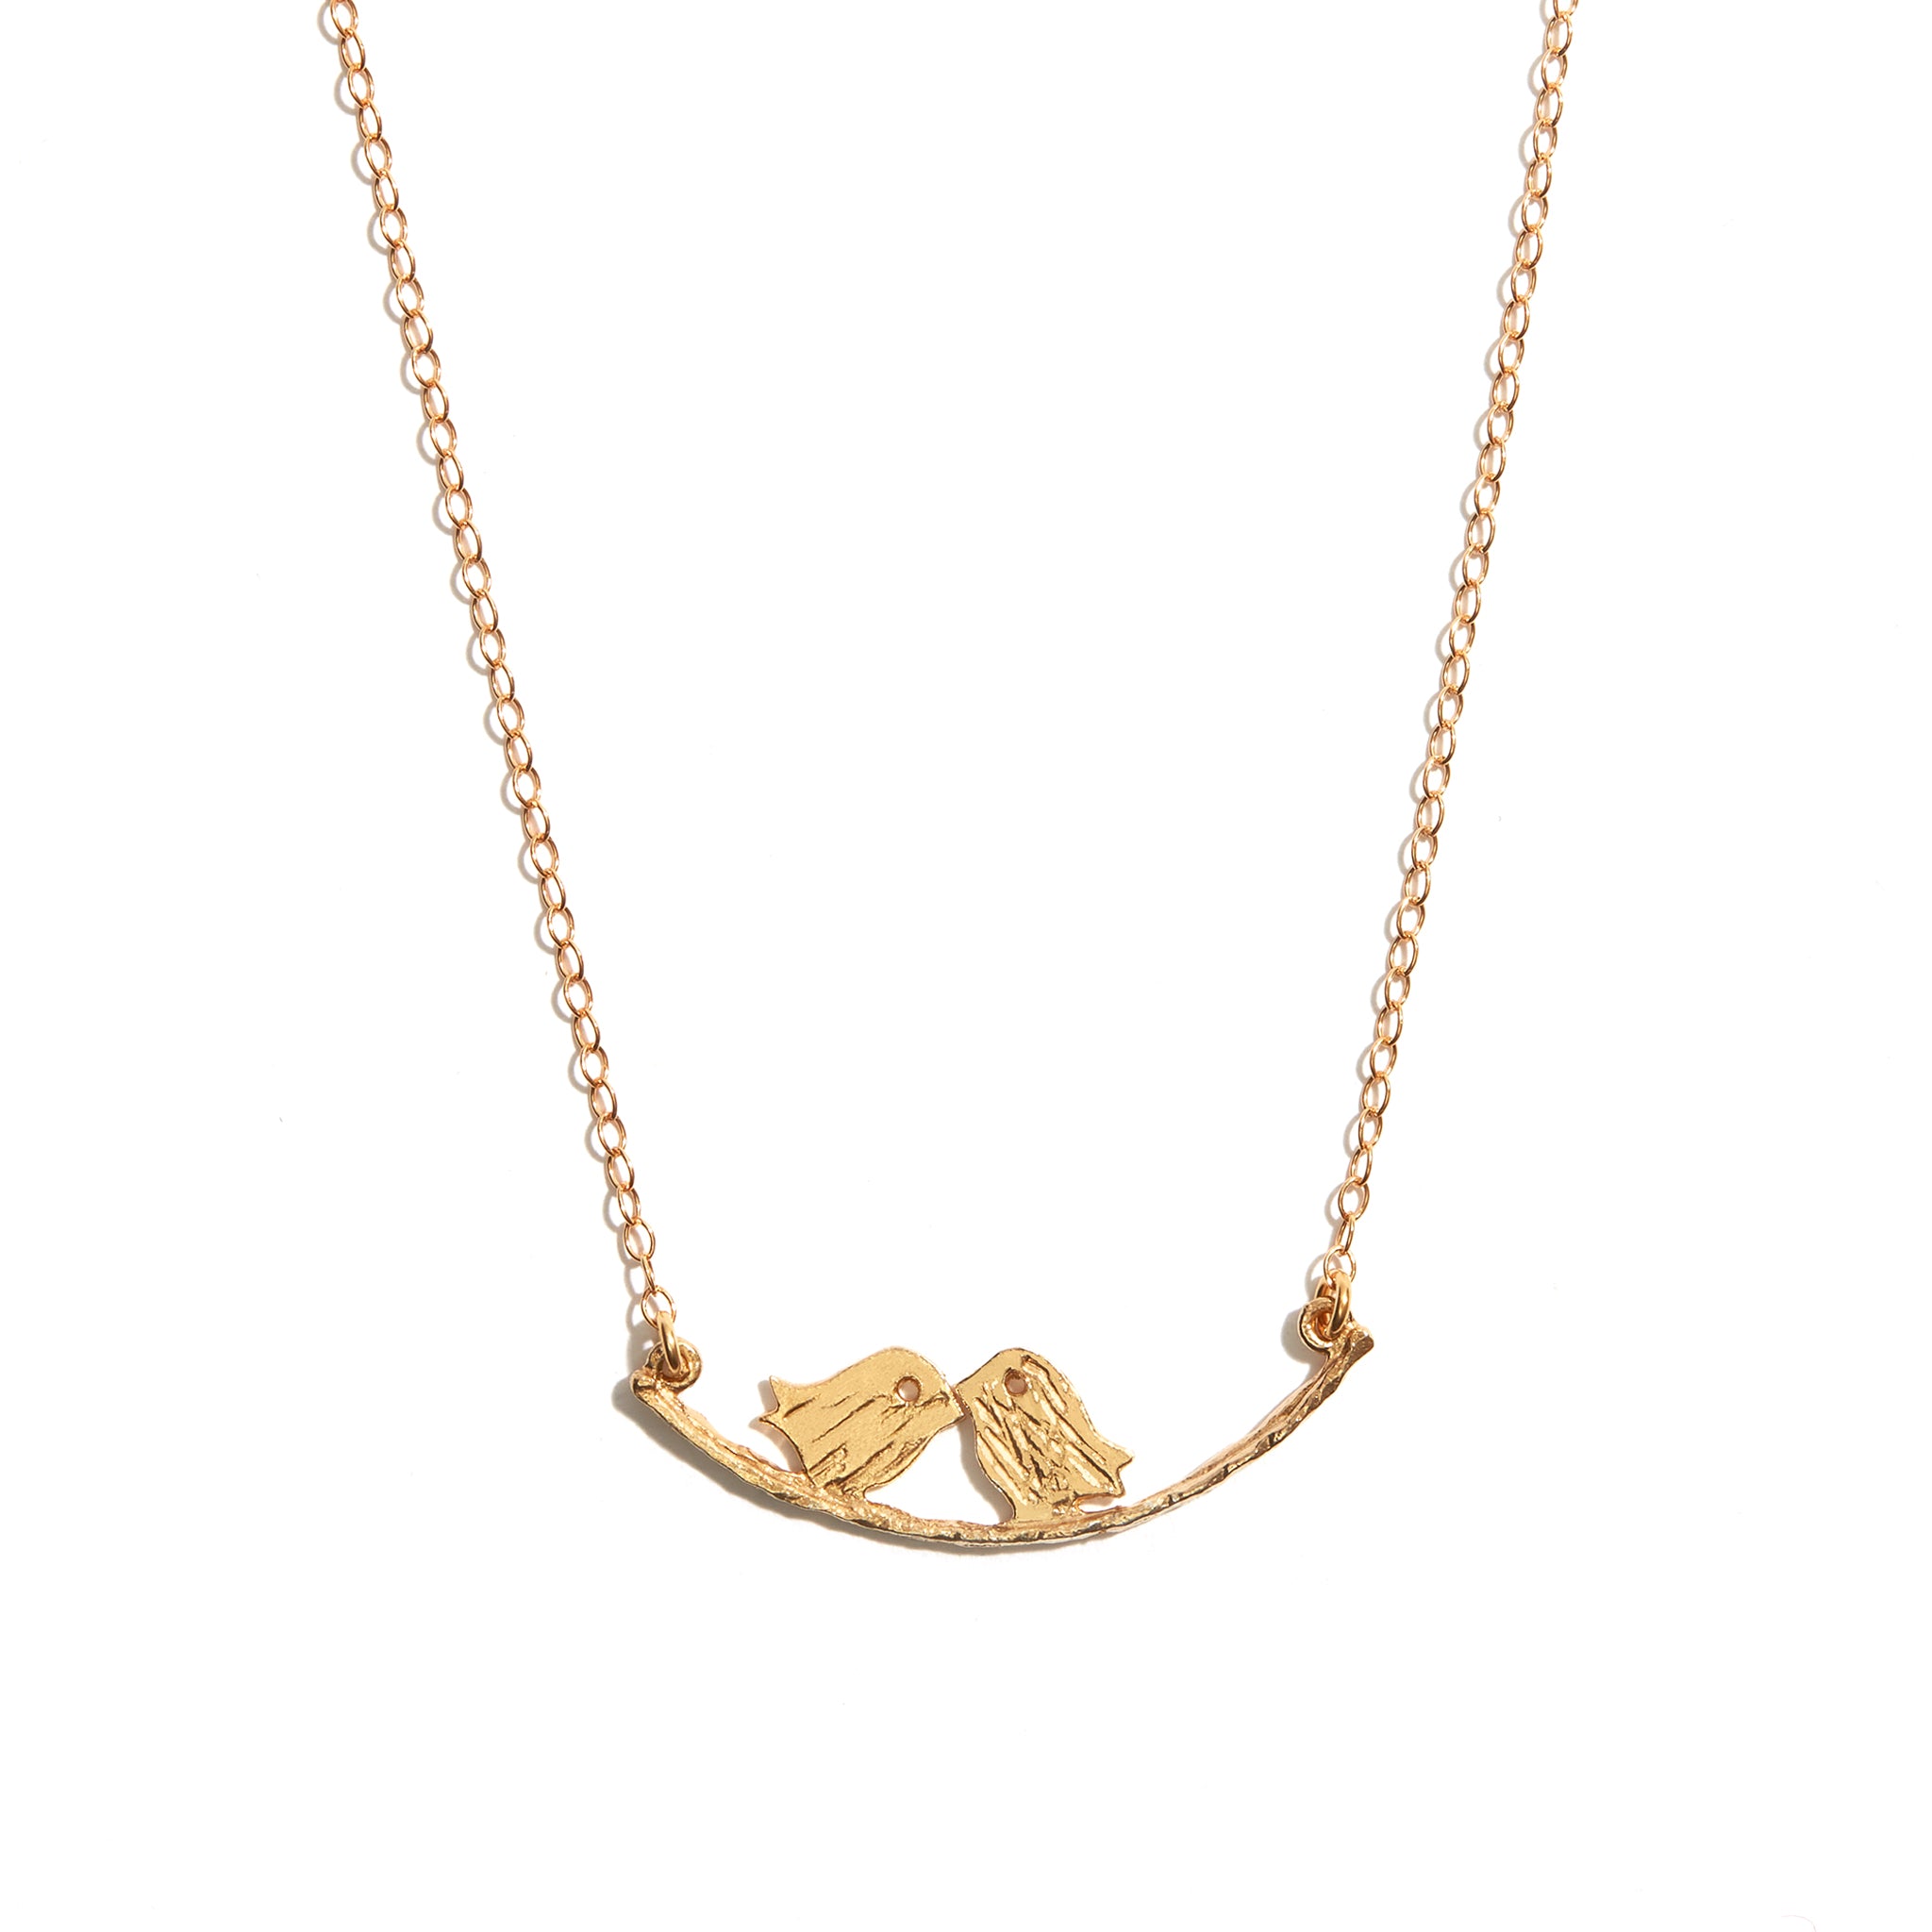 Charming Seoidín Love Birds Necklace in 14 carat gold-fill, exuding romance and timeless beauty.